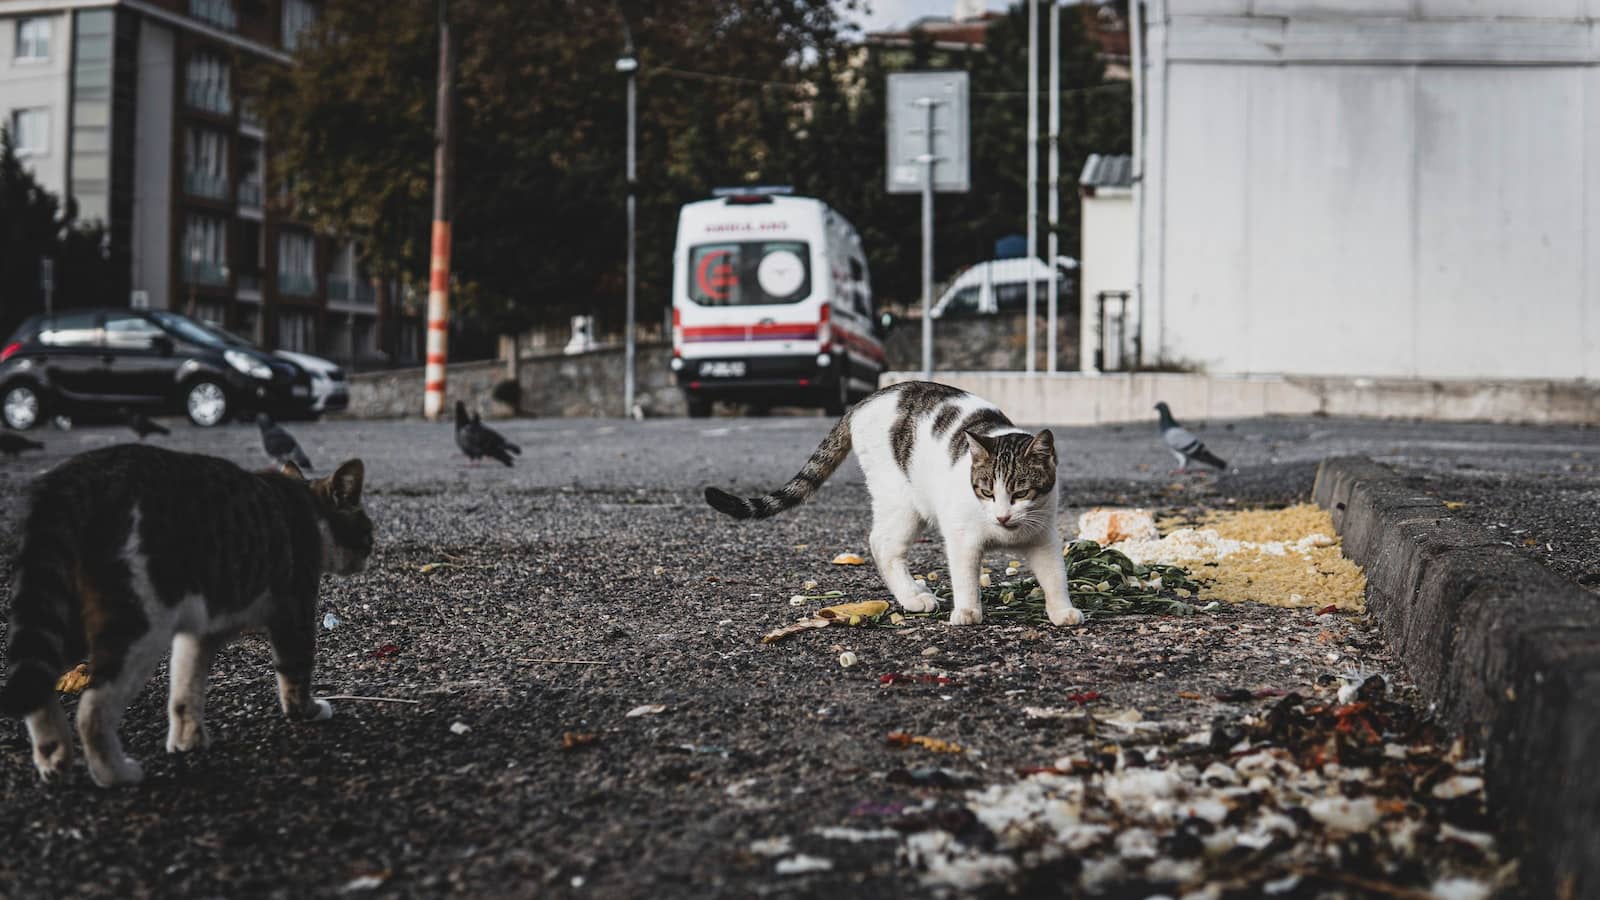 Stray Cats Walking on the Street